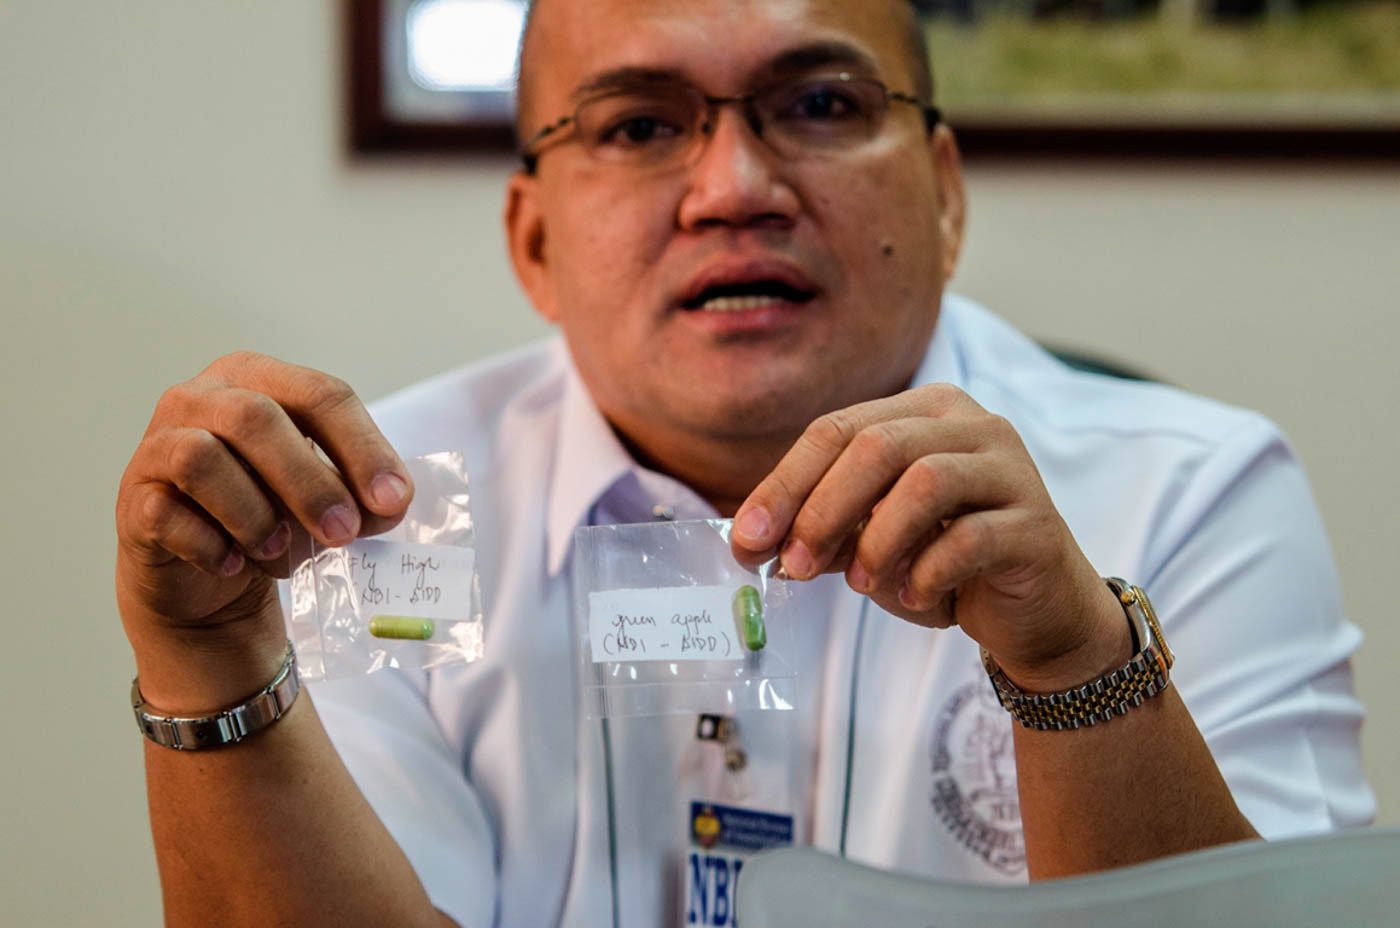 SAMPLE PARTY DRUGS. NBI Anti-Illegal Drugs Division chief Joel Tovera holds up samples of the 'fly high' and 'green apple' illegal designer drugs. Photo by Rob Reyes/Rappler  